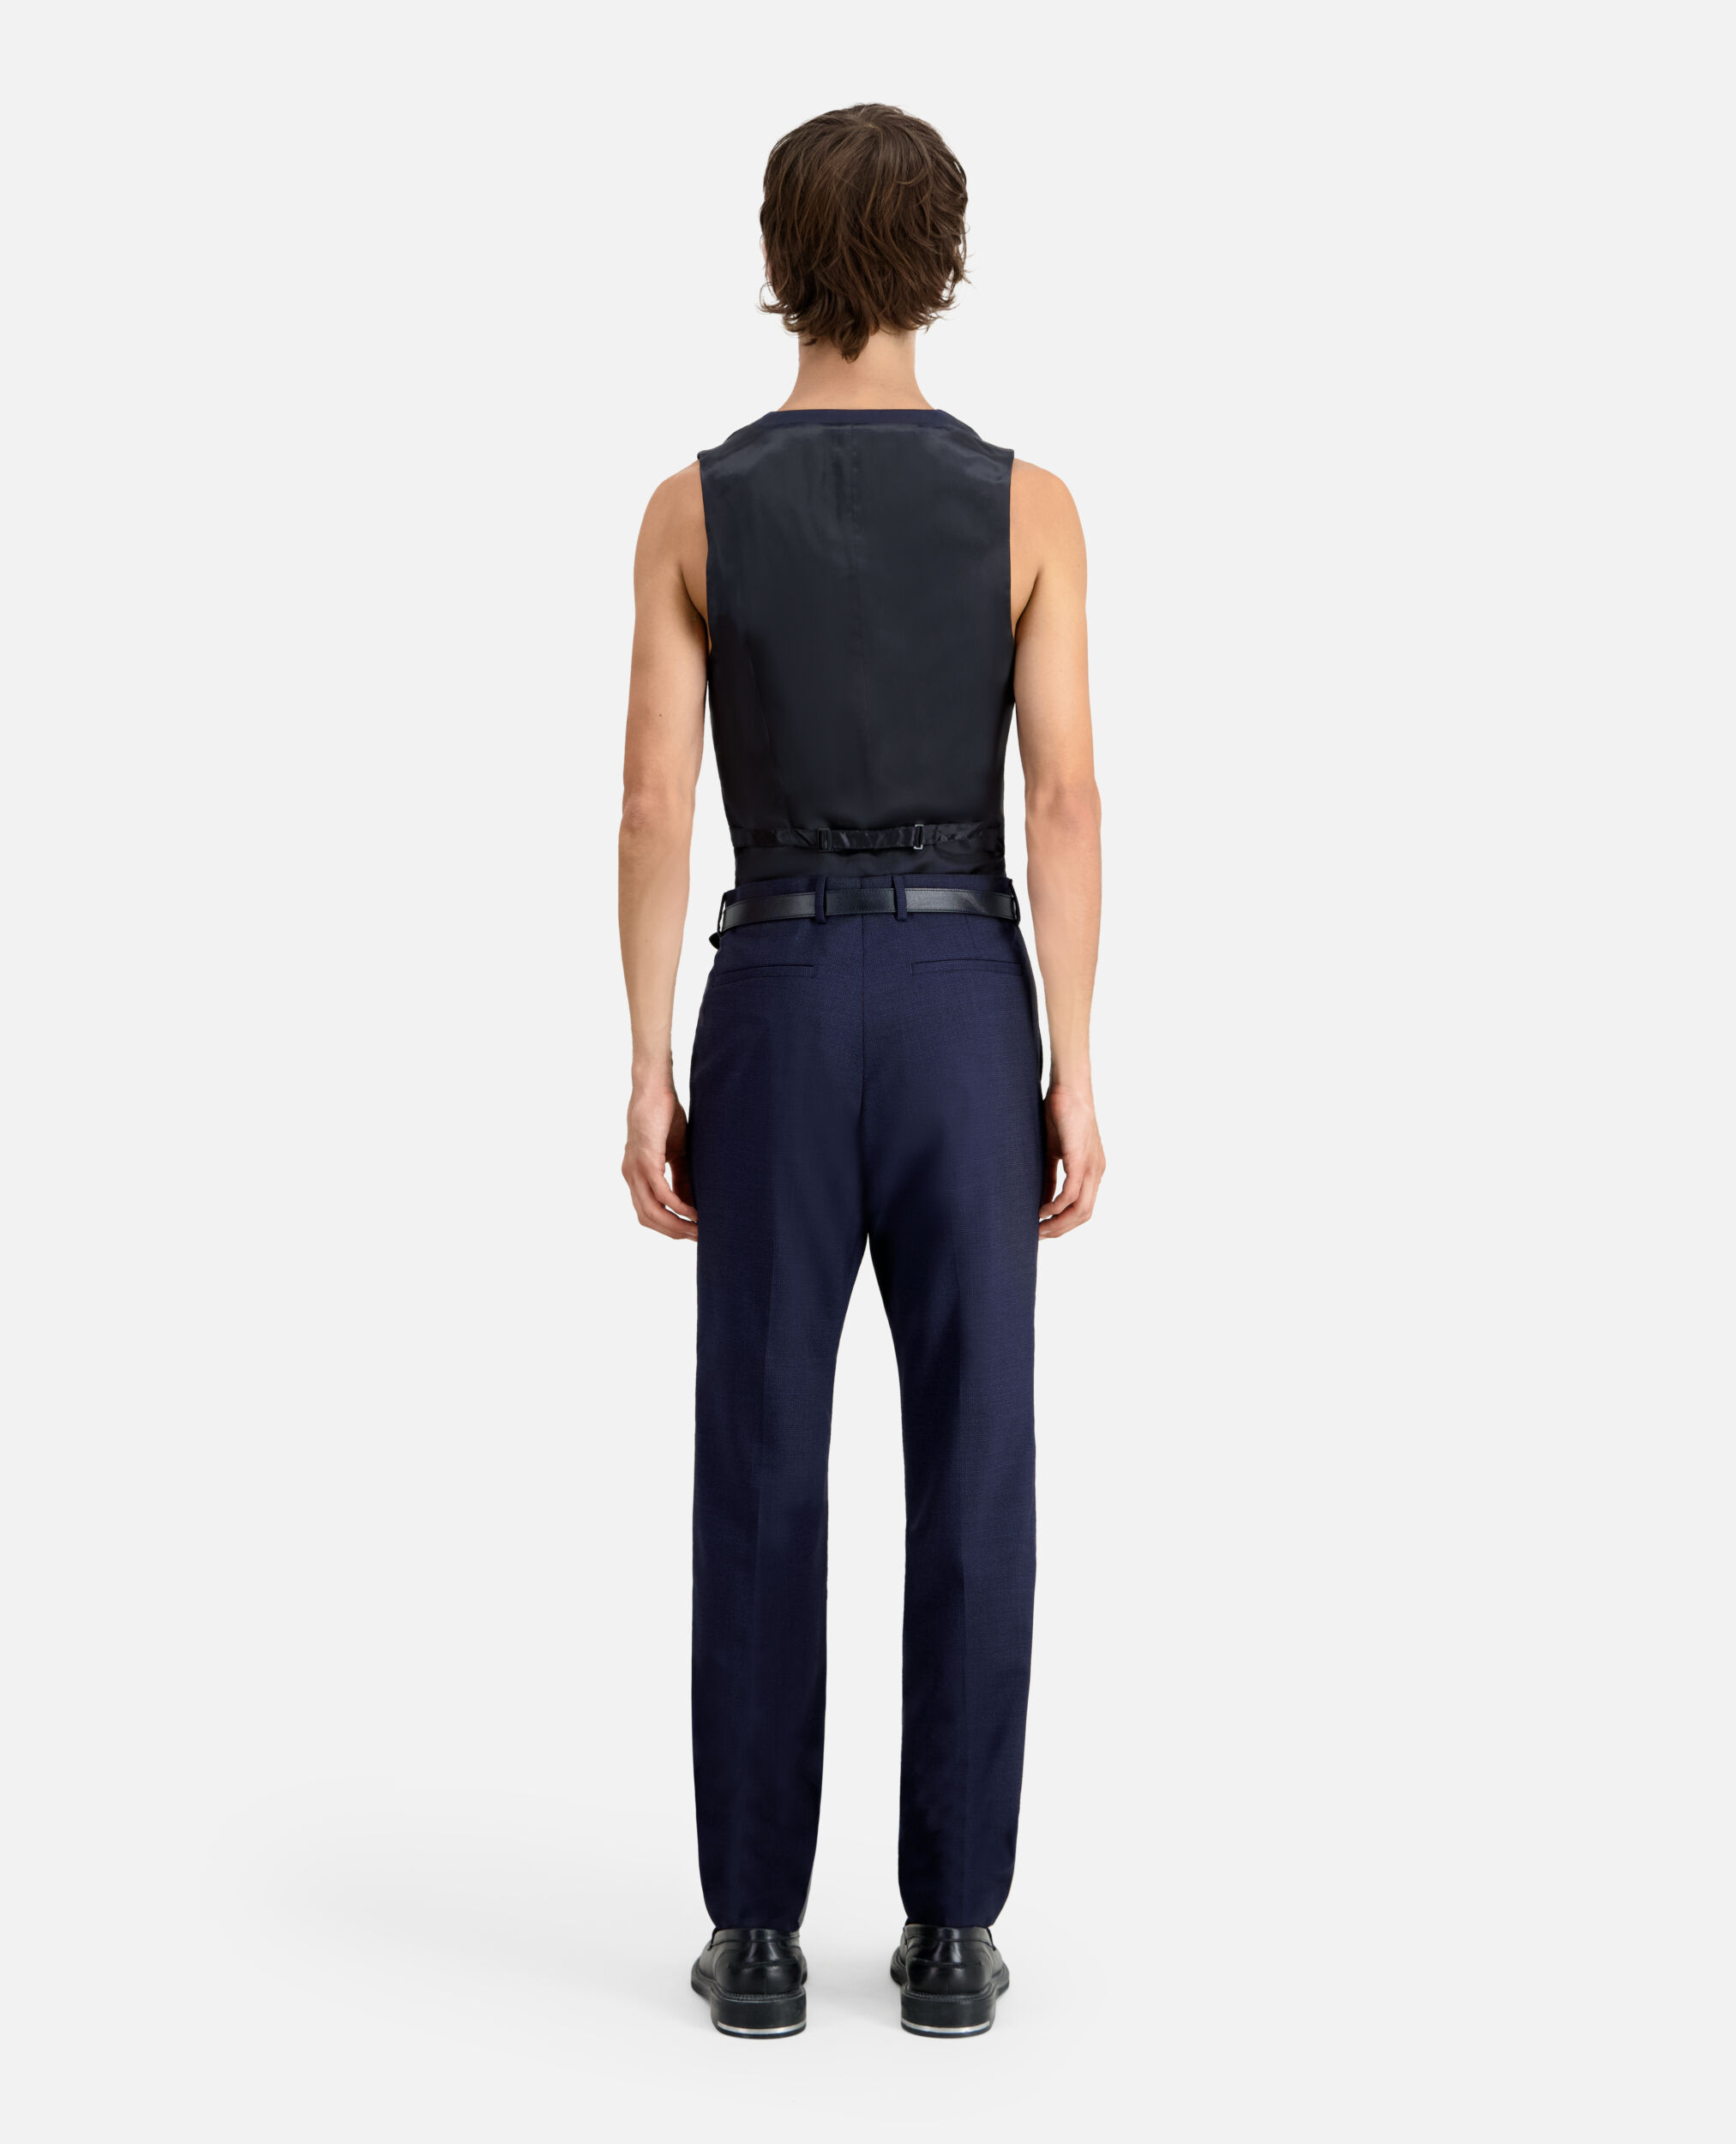 Navy blue micro-pattern wool suit trousers, NAVY / BLACK, hi-res image number null